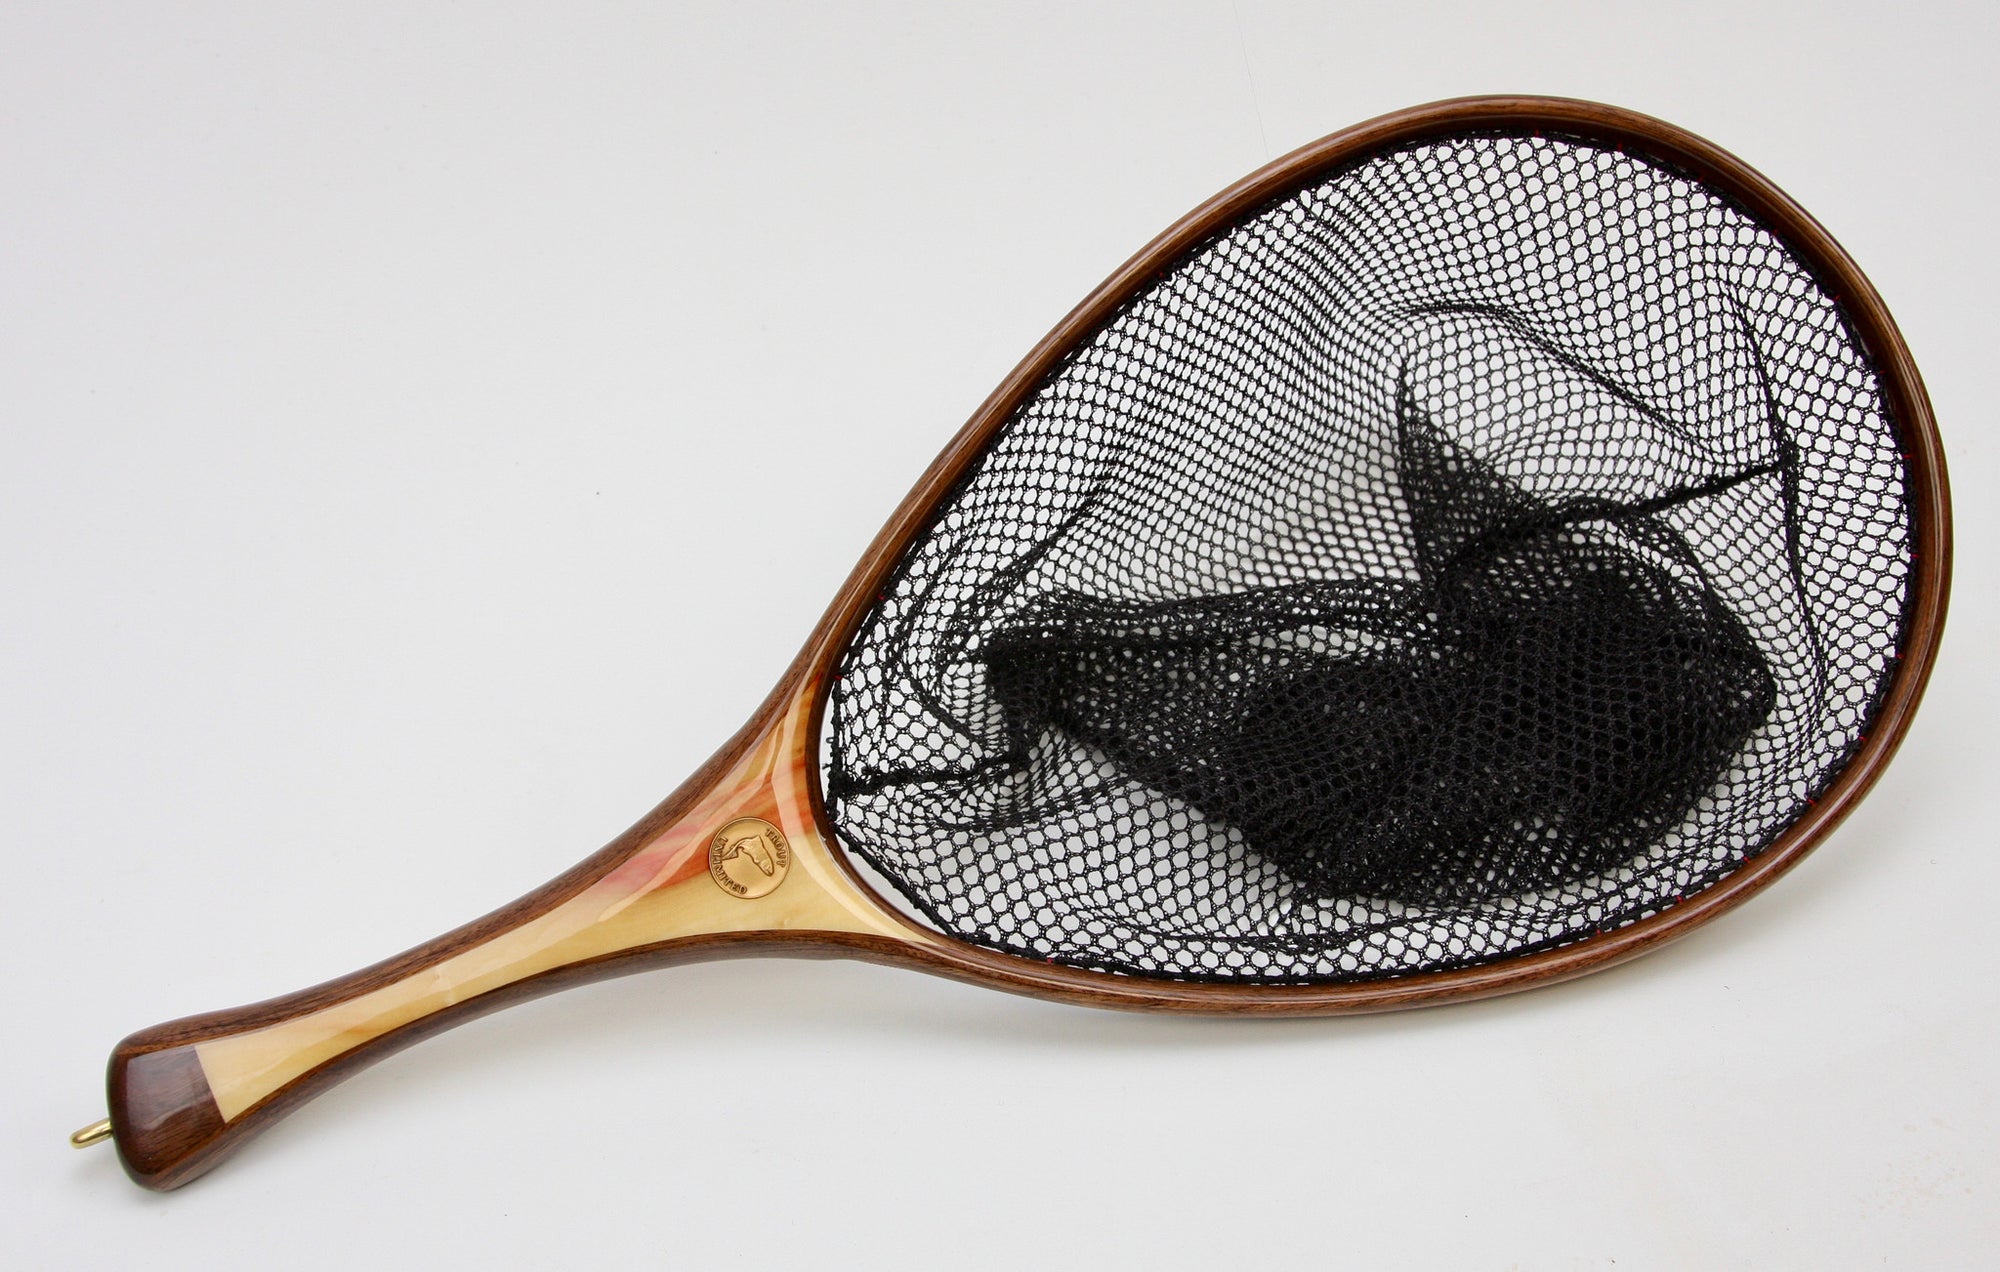 A fly fishing net with walnut hoop and handle of light wood.